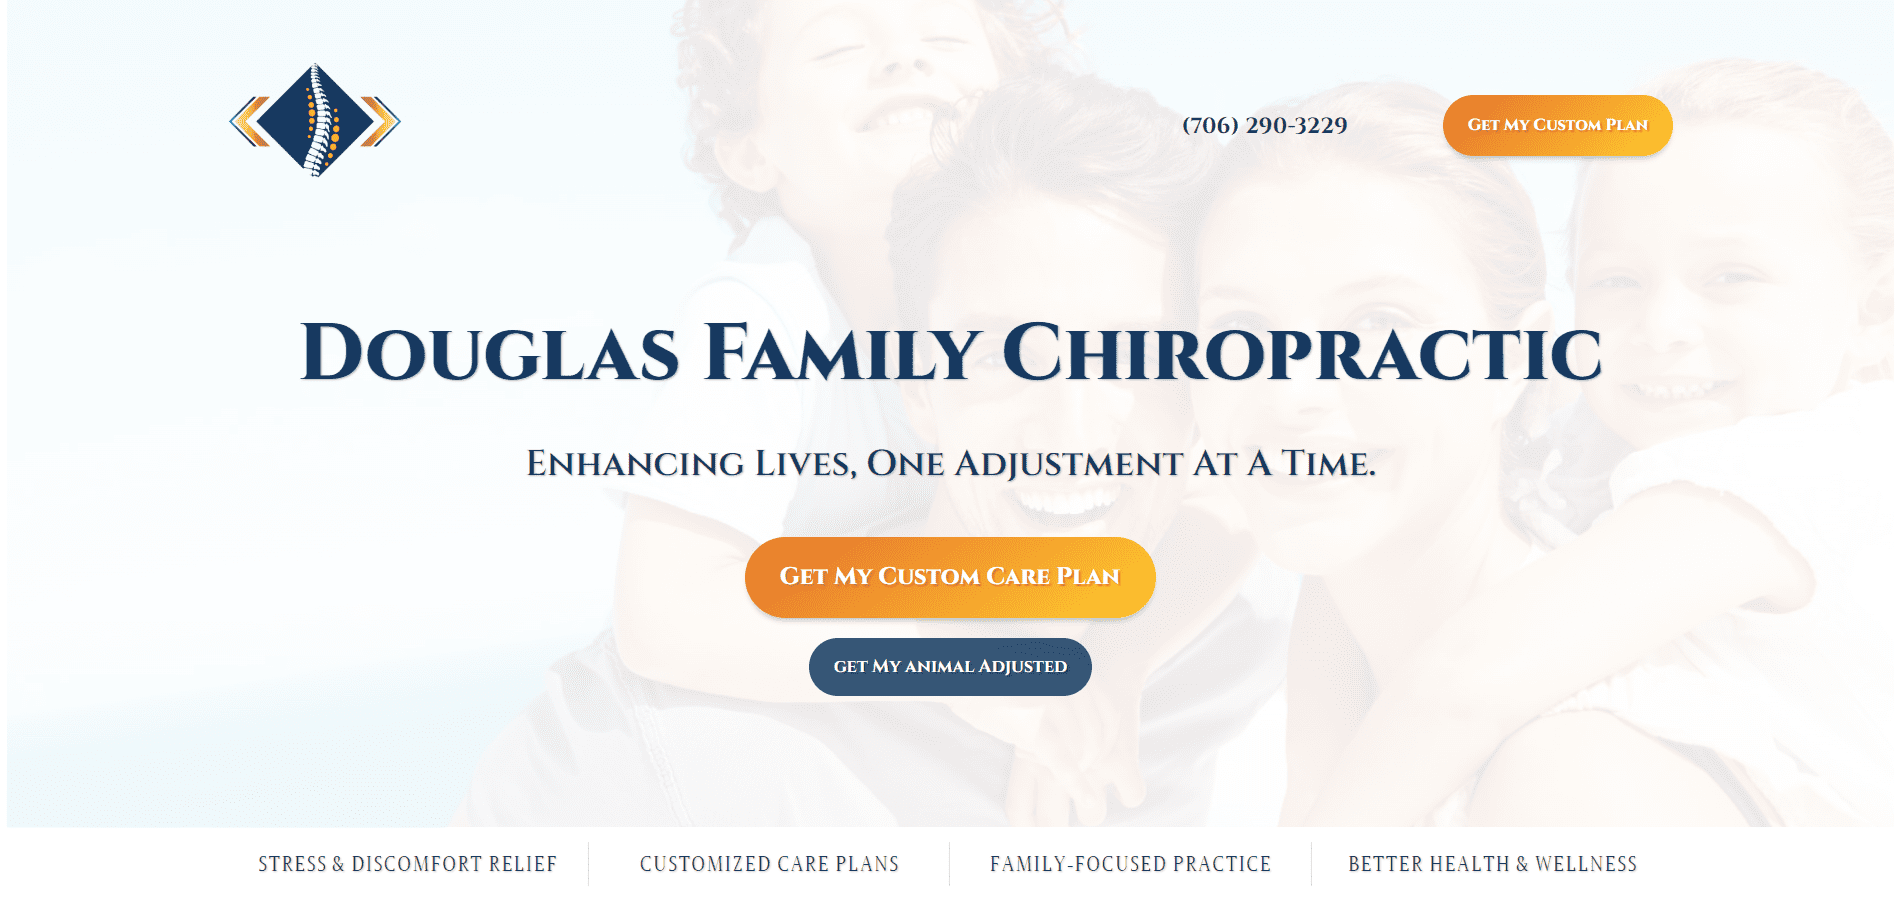 Professionally Designed WordPress Website Built For A Chiropractic Office In Rome, GA